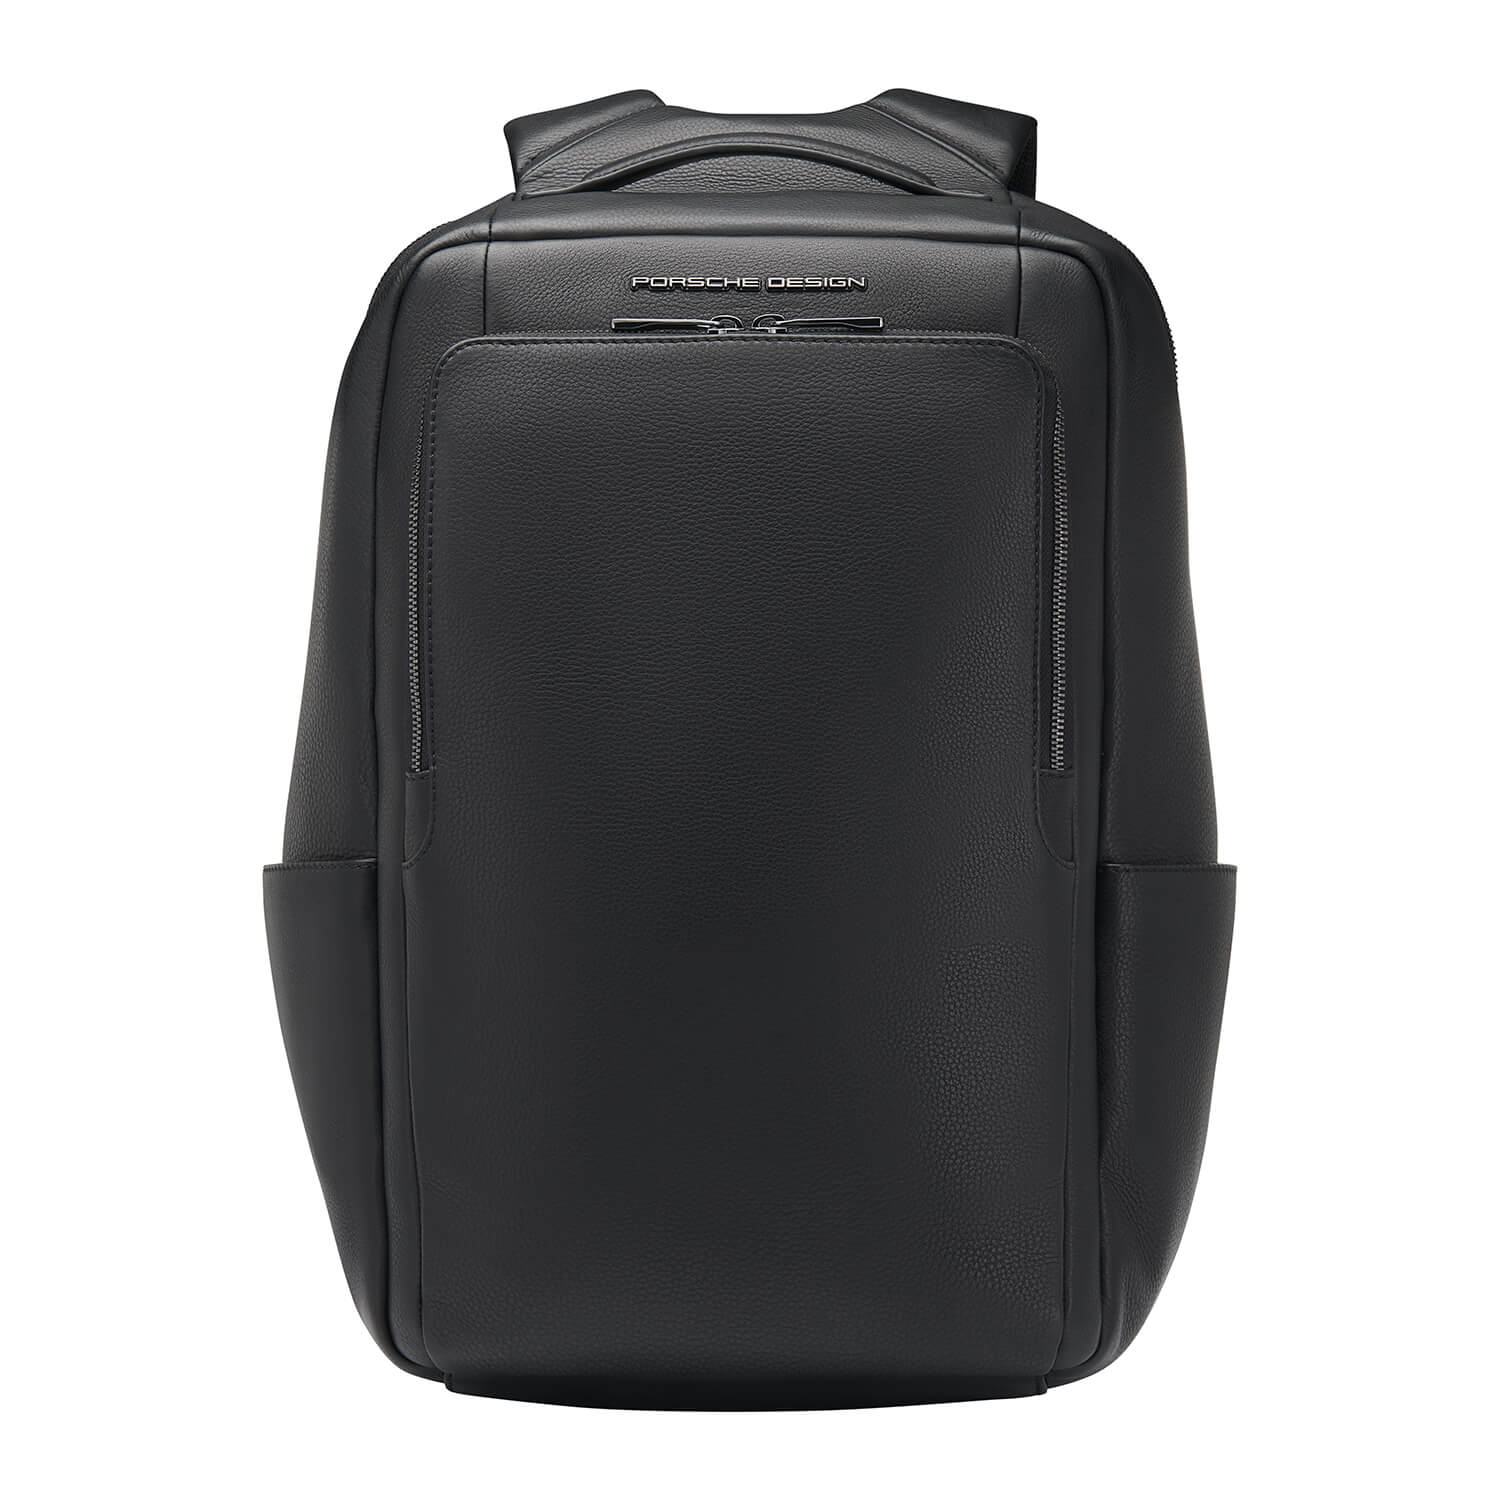 Pd Roadster Leather Backpack by Brics (Color: Black, Size: Medium)